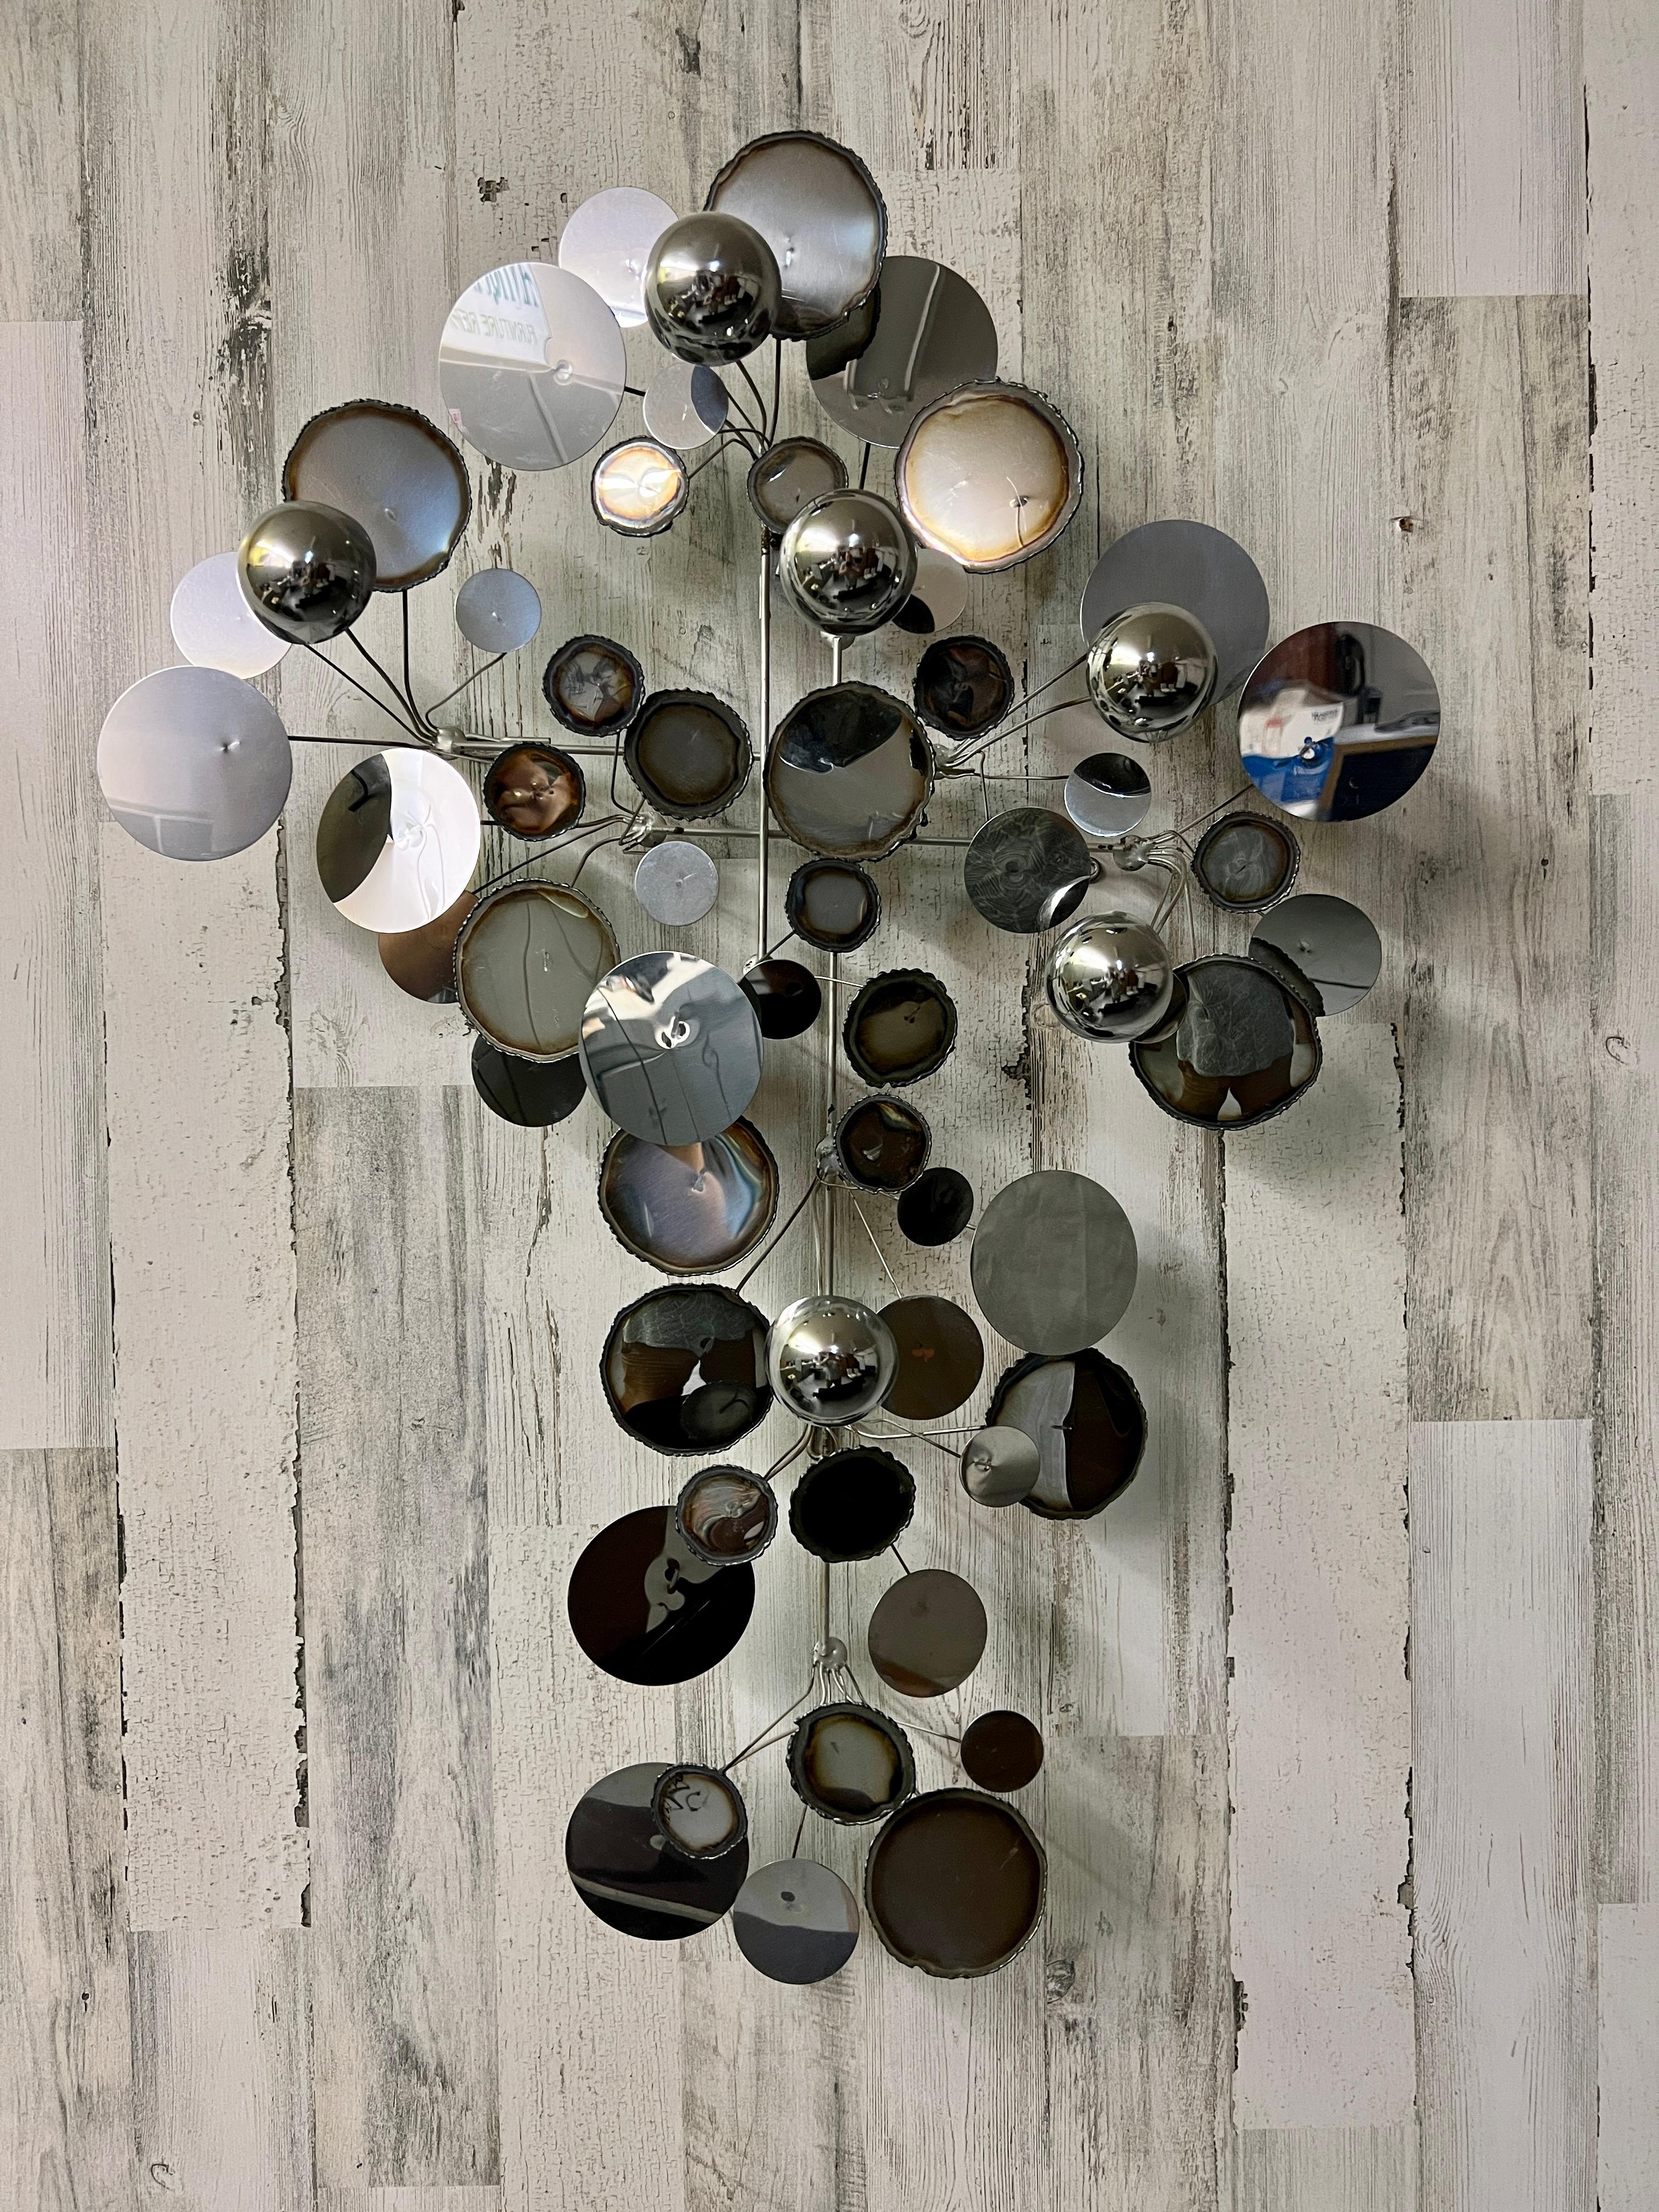 Half spheres and numerous variation of chrome with matte metal circular disc decorations mounted on a wire frame.